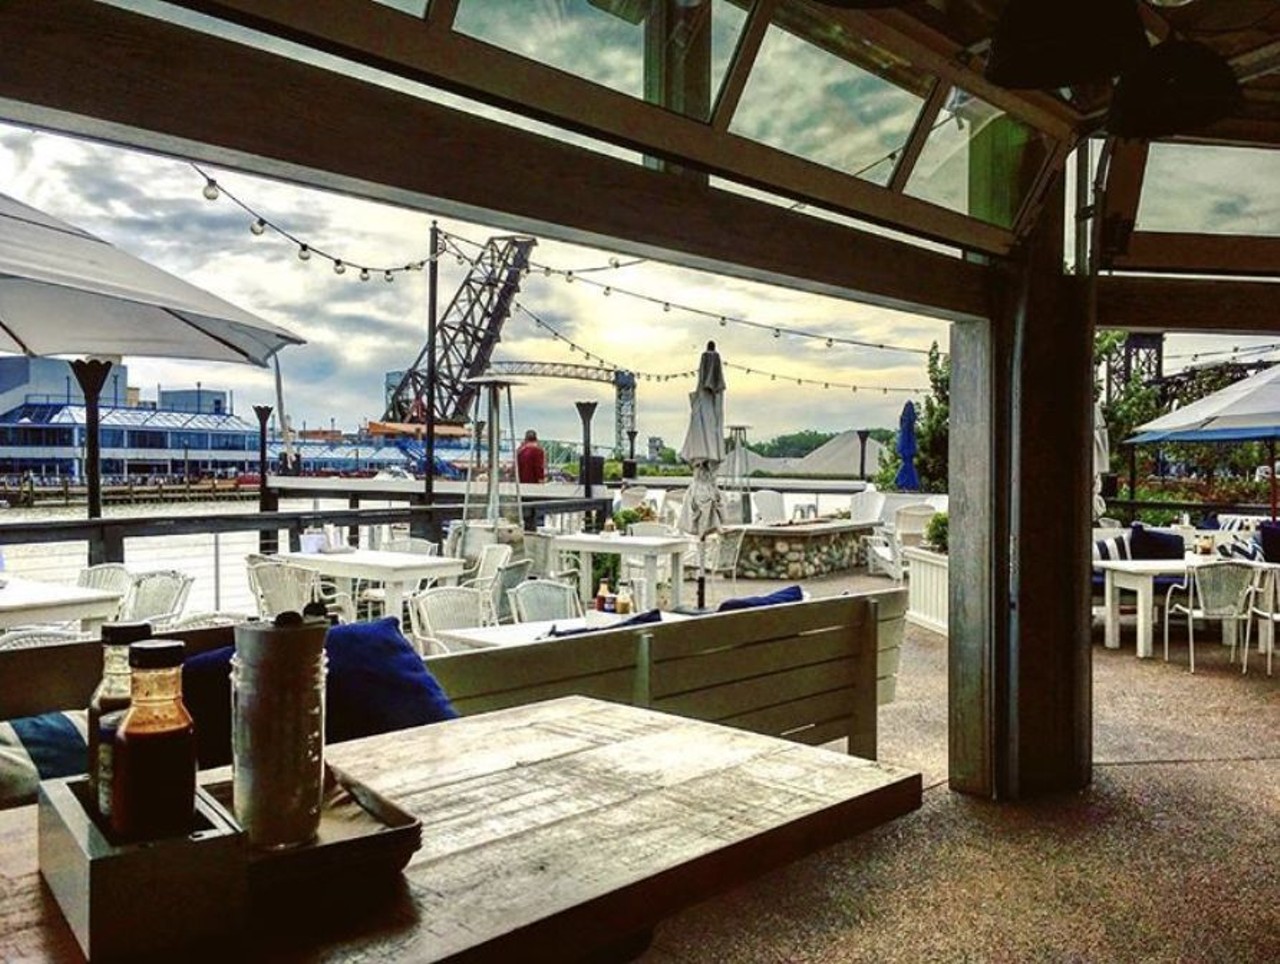 Lindey's Lake House (Flats East Bank location)
1146 Old River Rd., Cleveland
It&#146;s only natural that a restaurant meant to replicate a cozy beachside escape should showcase its breezy riverside views. Feel free to take it all in with some tacos and a margarita.
Photo via mandy.steve/Instagram